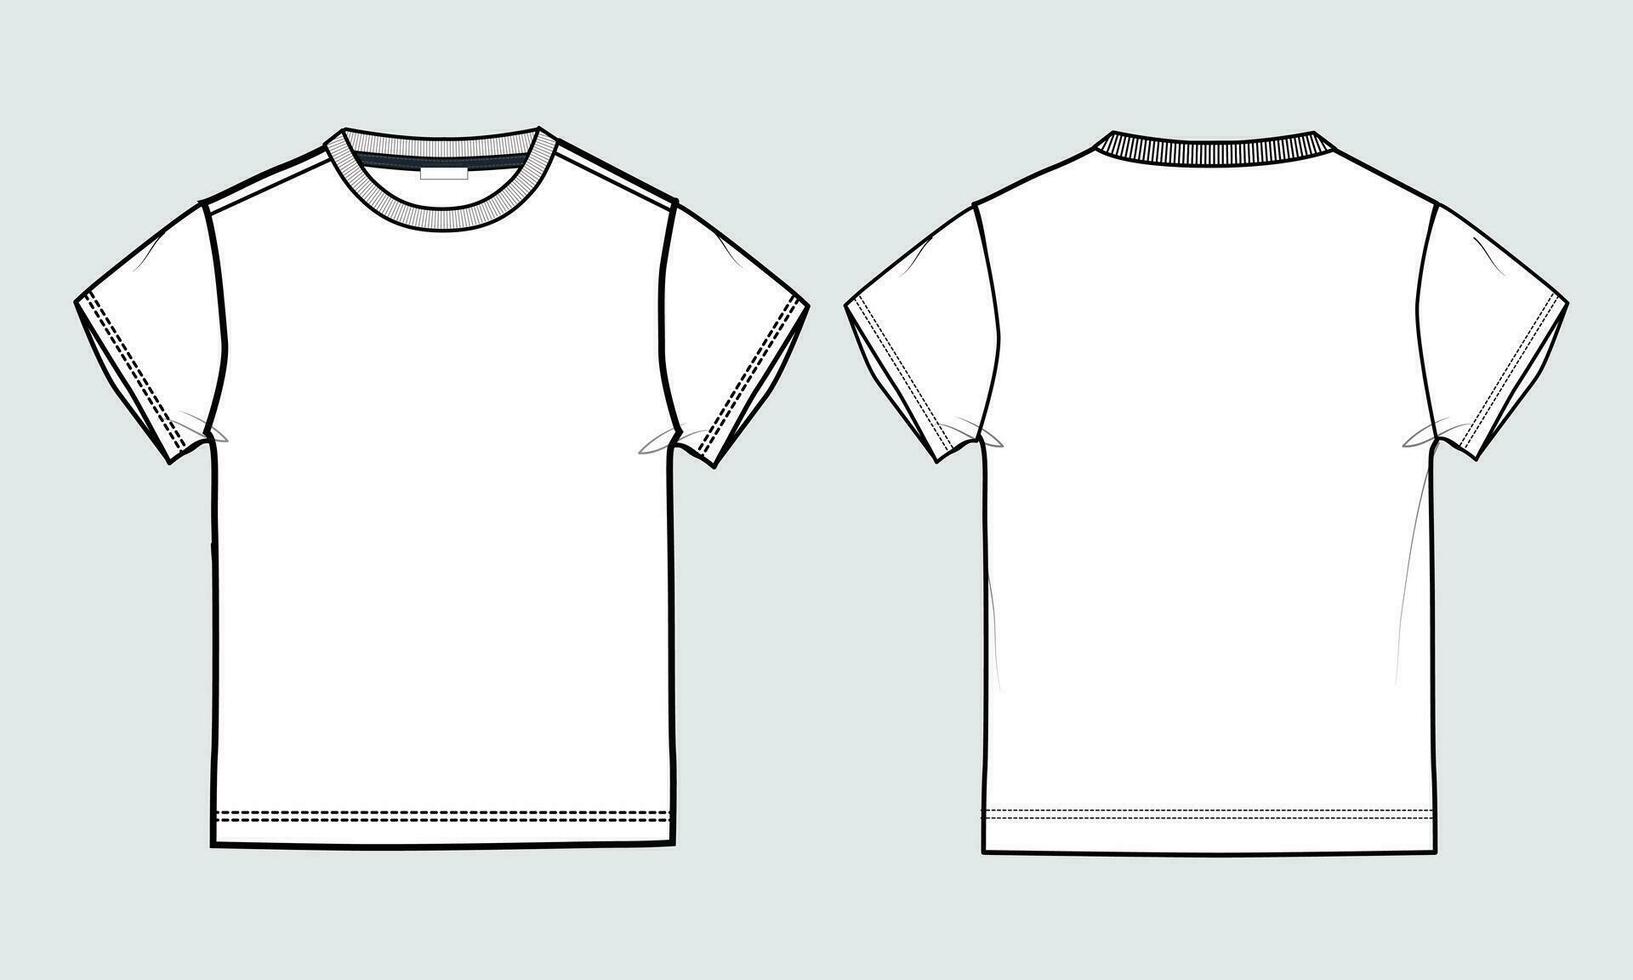 Regular fit Short sleeve T-shirt technical Sketch fashion Flat Template With Round neckline Front and back view. Clothing Art Drawing Vector illustration basic apparel design Mock up.